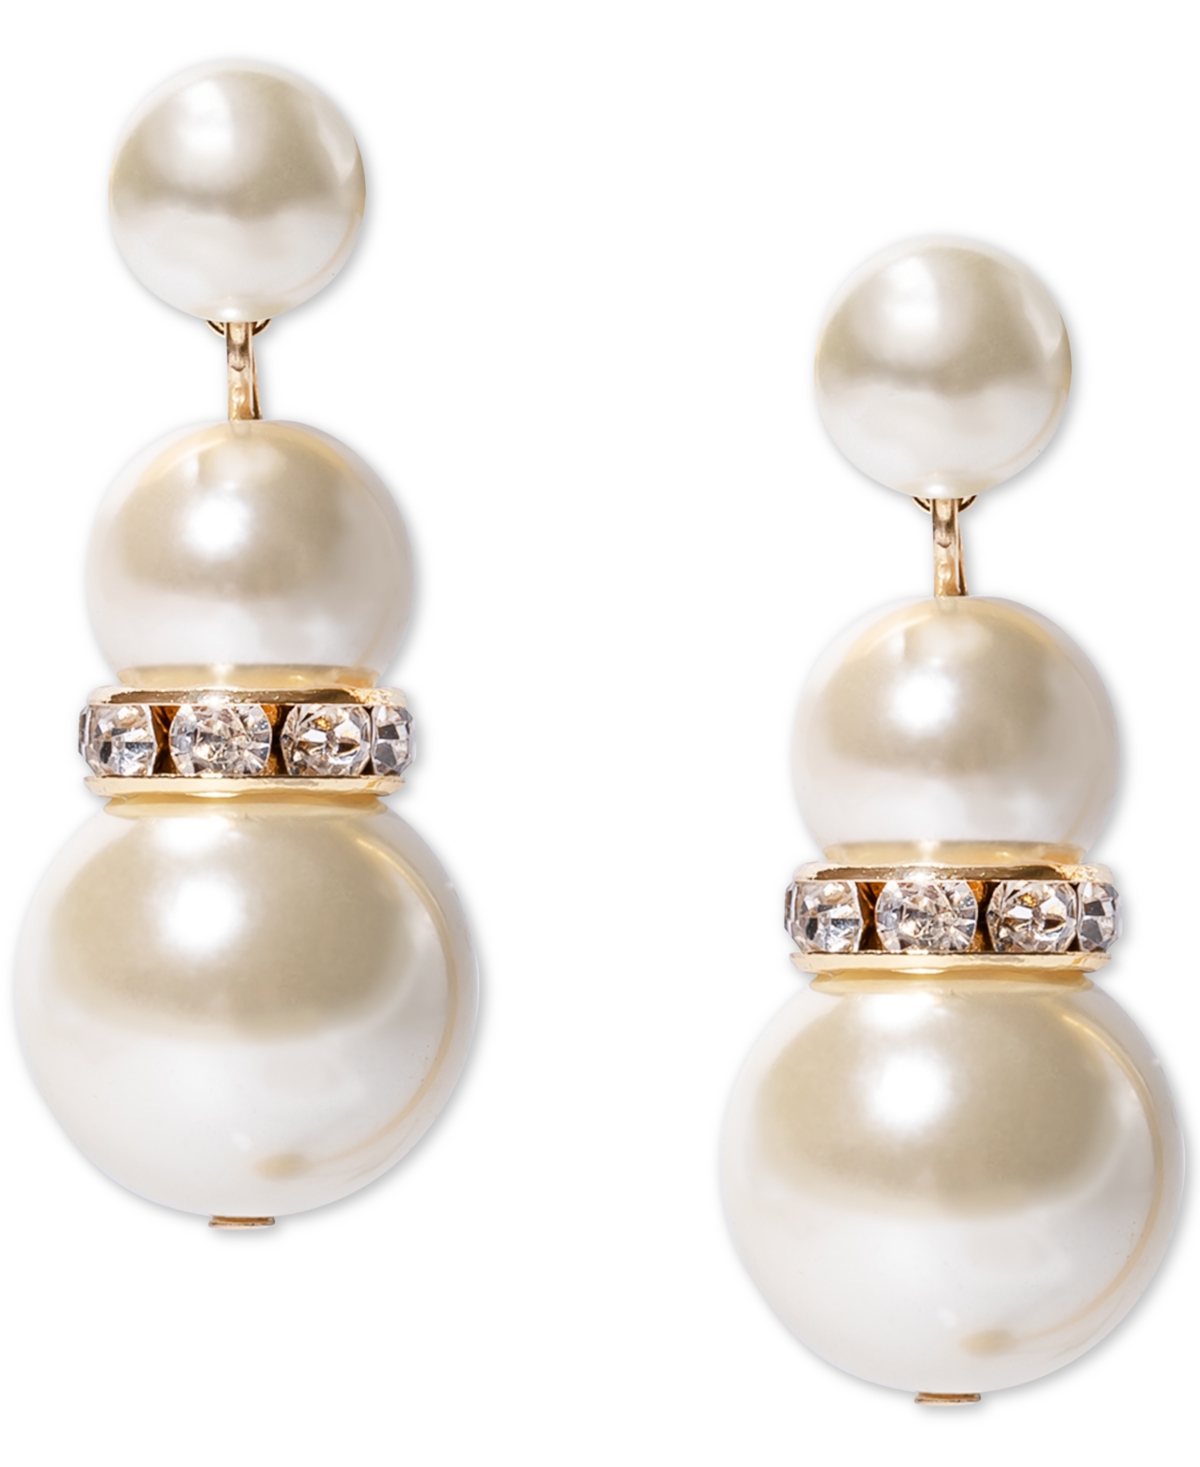 Gold-Tone Pave Rondelle Bead & Imitation Pearl Drop Earrings, Created for Macy's - White